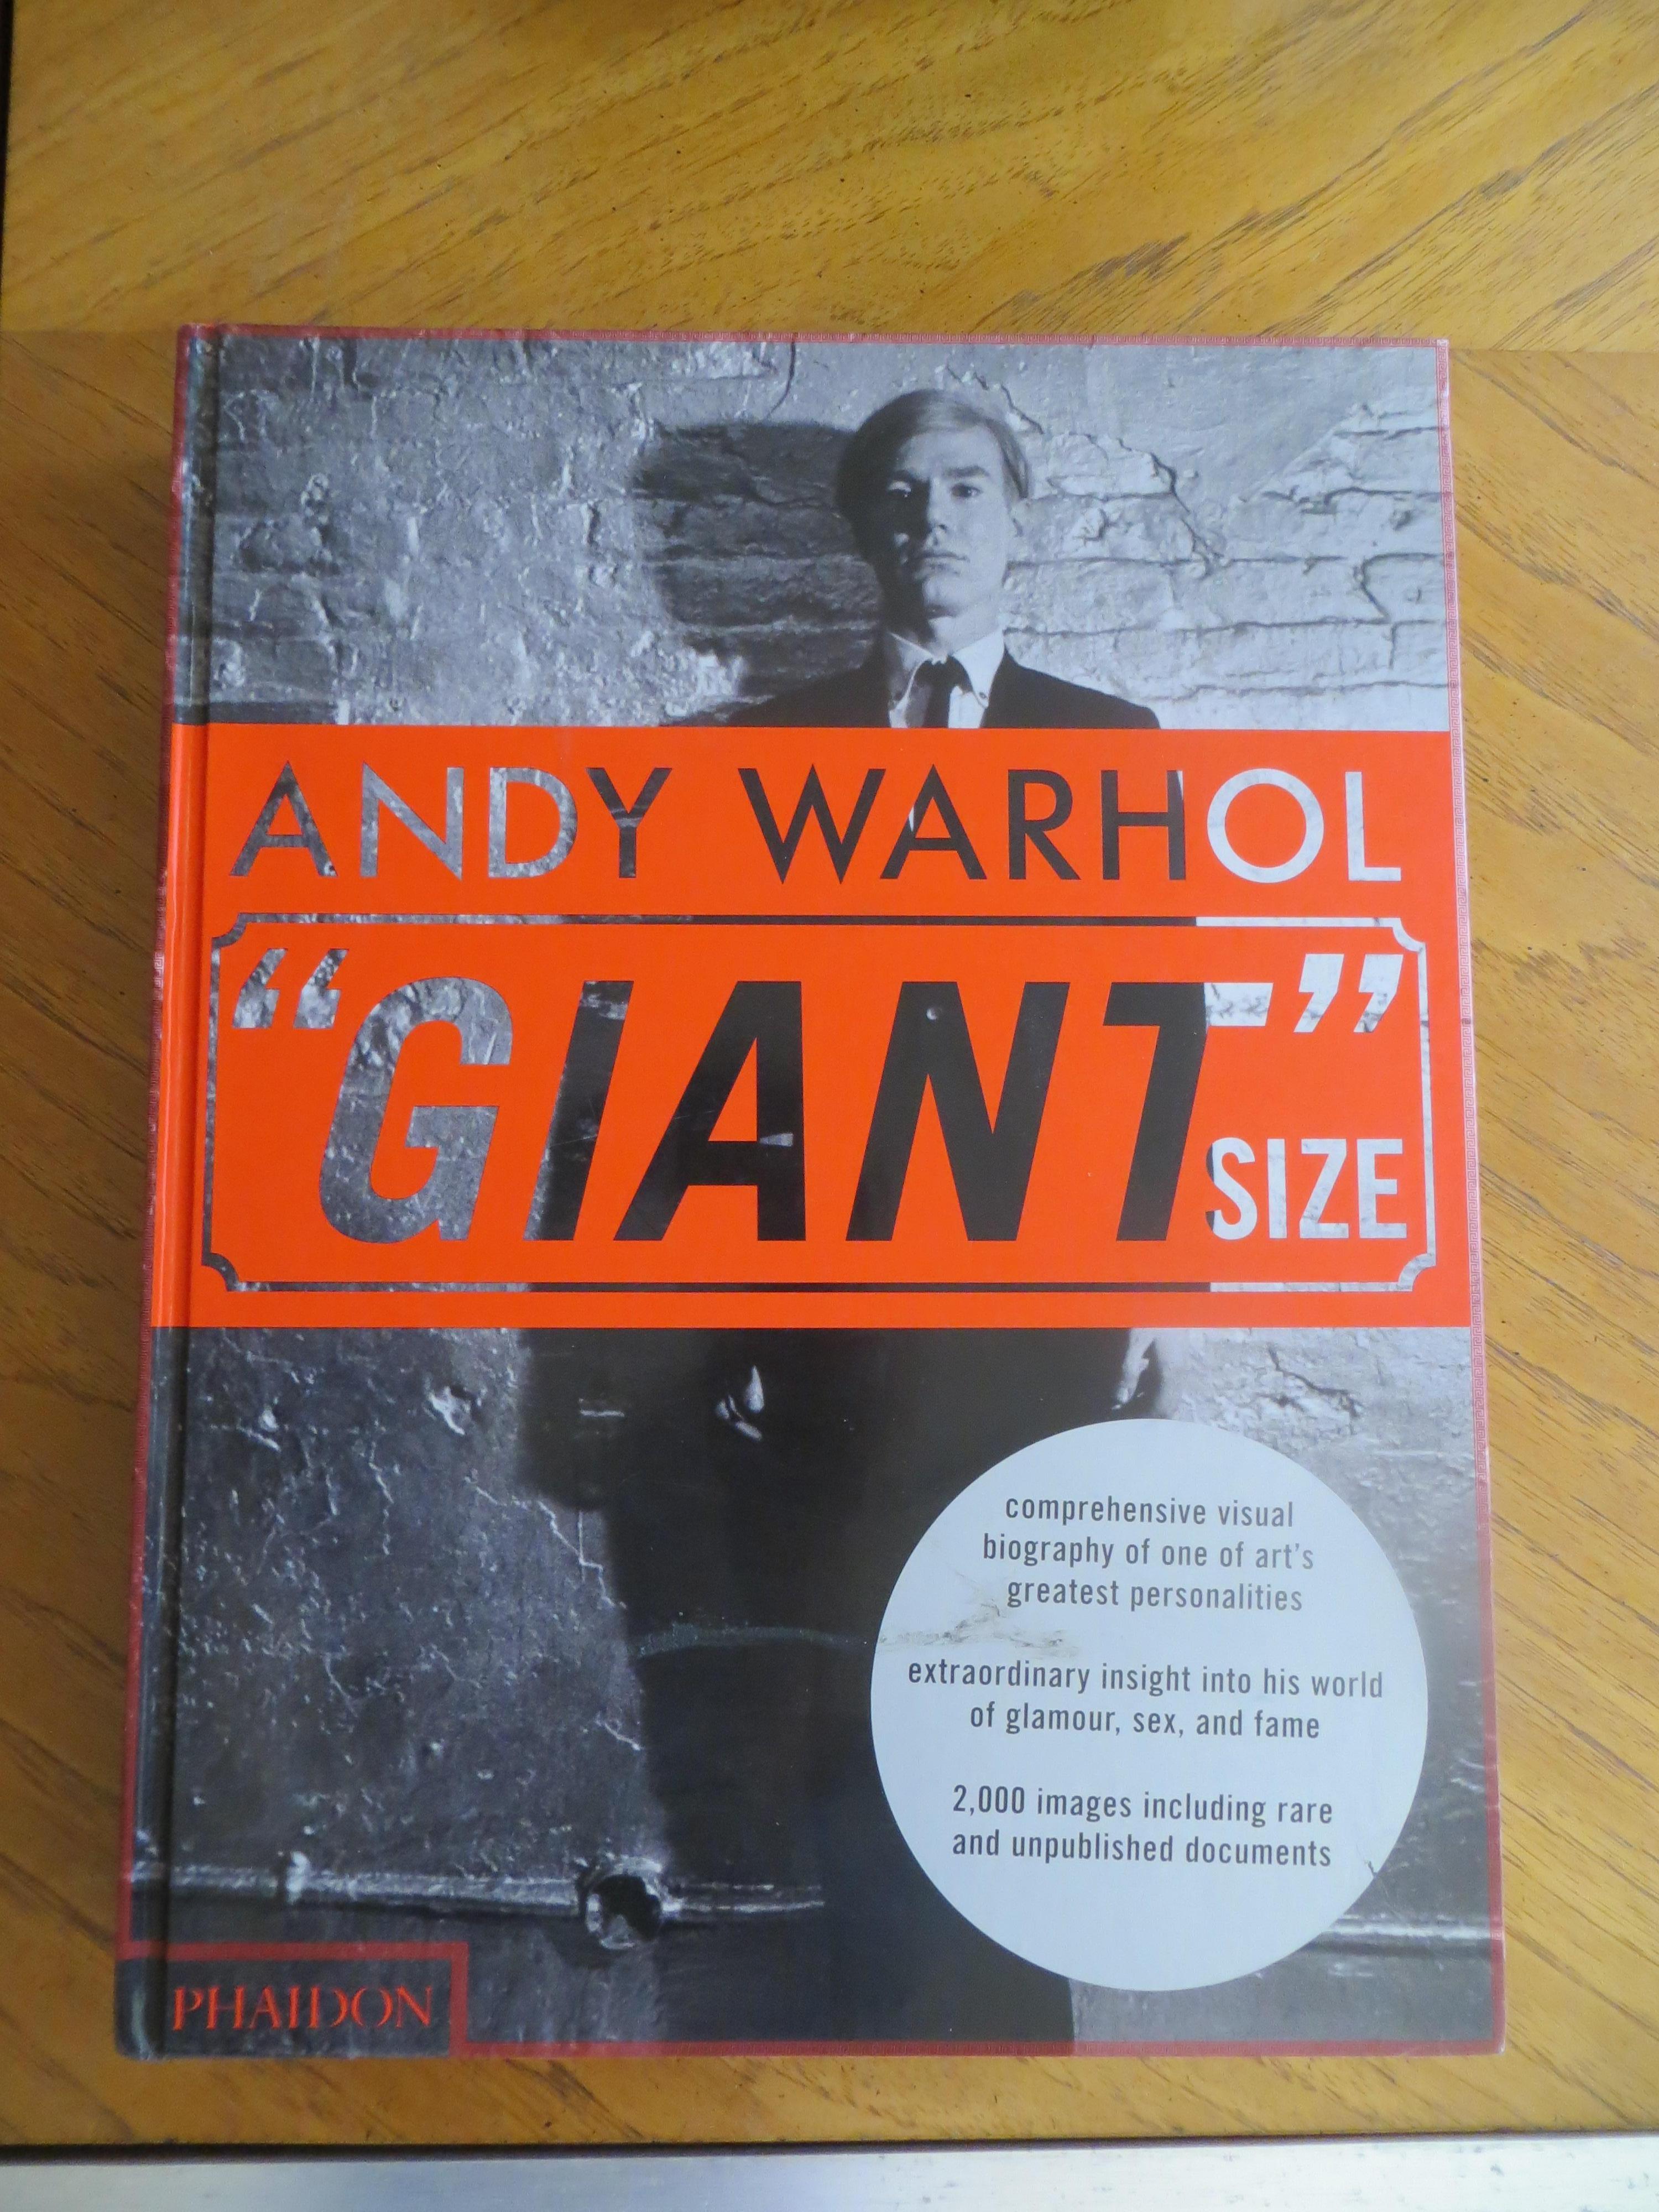 Andy Warhol: "Giant" Size Large Format Dave Hickey Steven Bluttal Editors - Art by (after) Andy Warhol